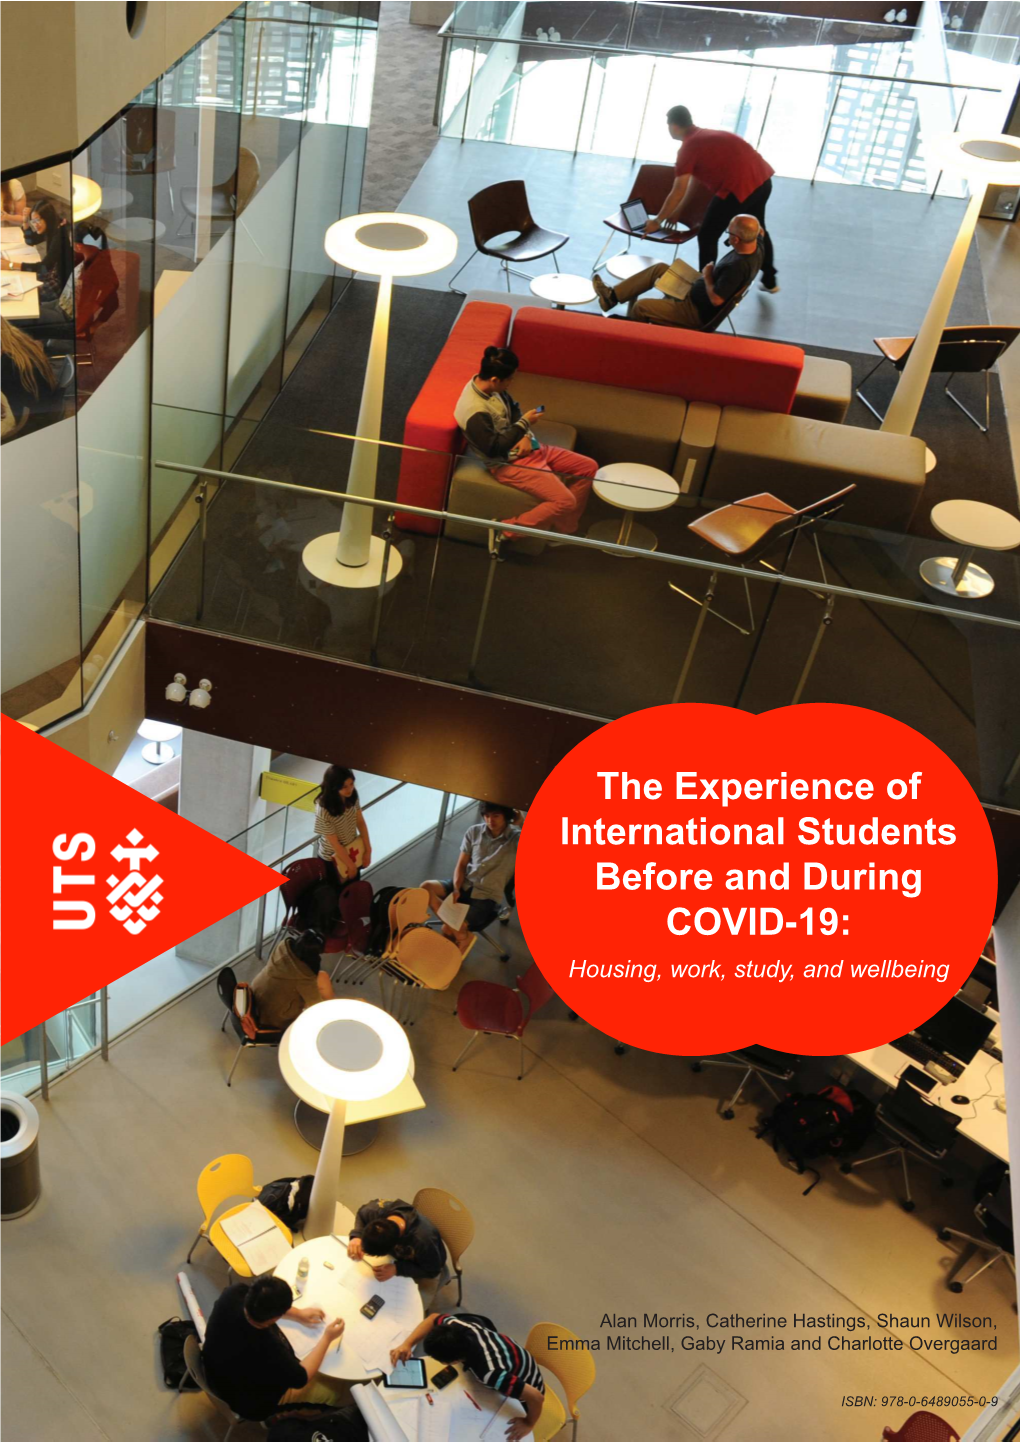 The Experience of International Students Before and During COVID-19: Housing, Work, Study, and Wellbeing